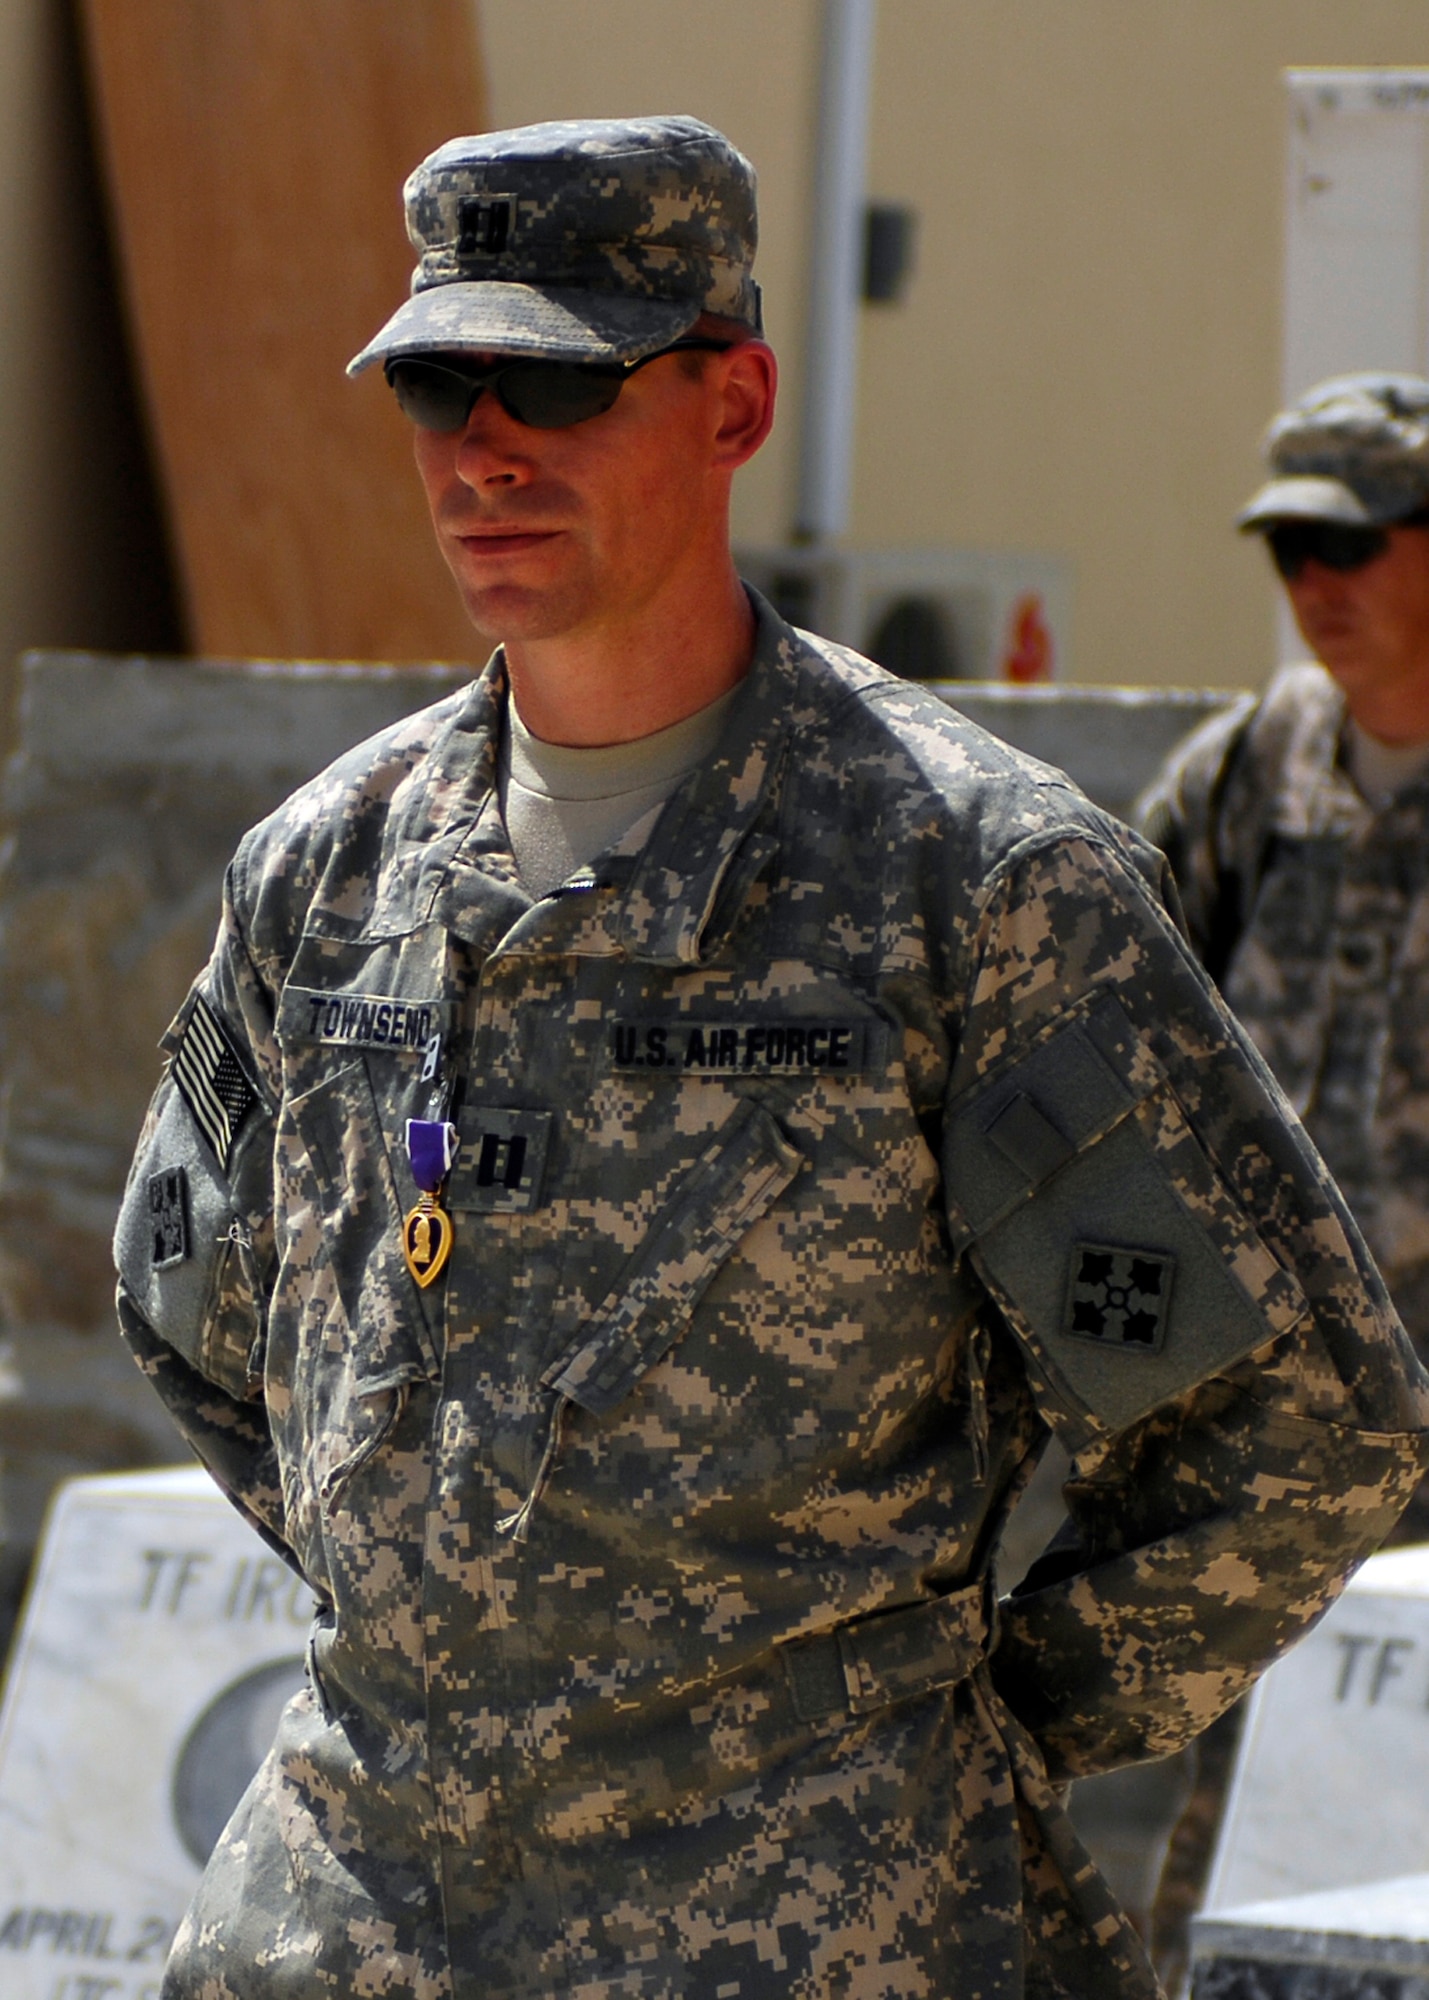 Air Force civil engineer awarded Purple Heart from sniper wounds > U.S ...